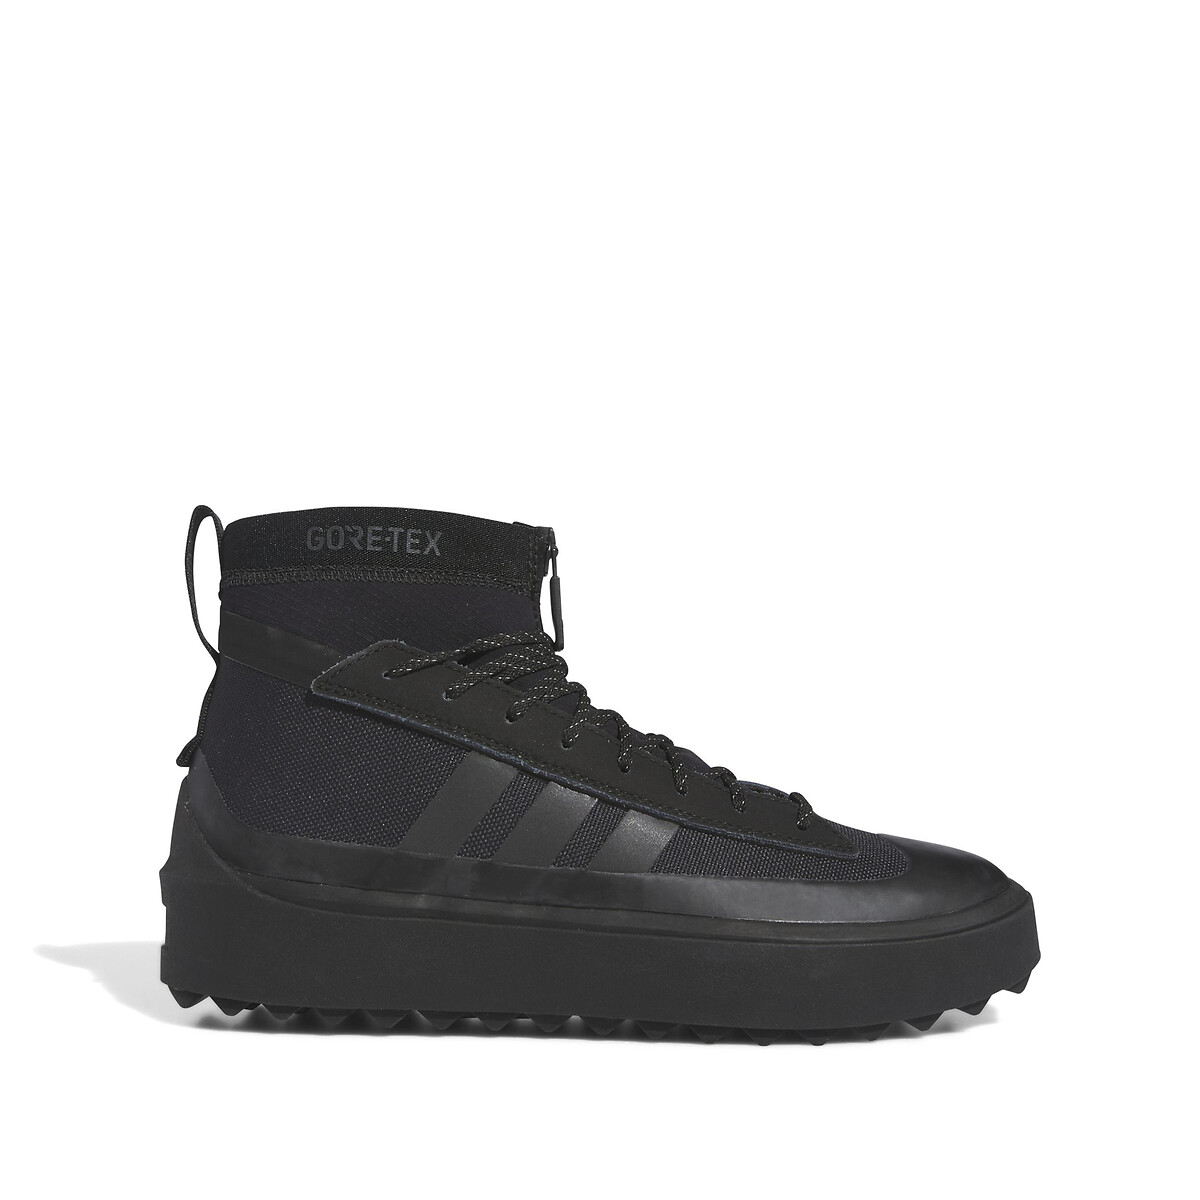 Znsored High Top Trainers